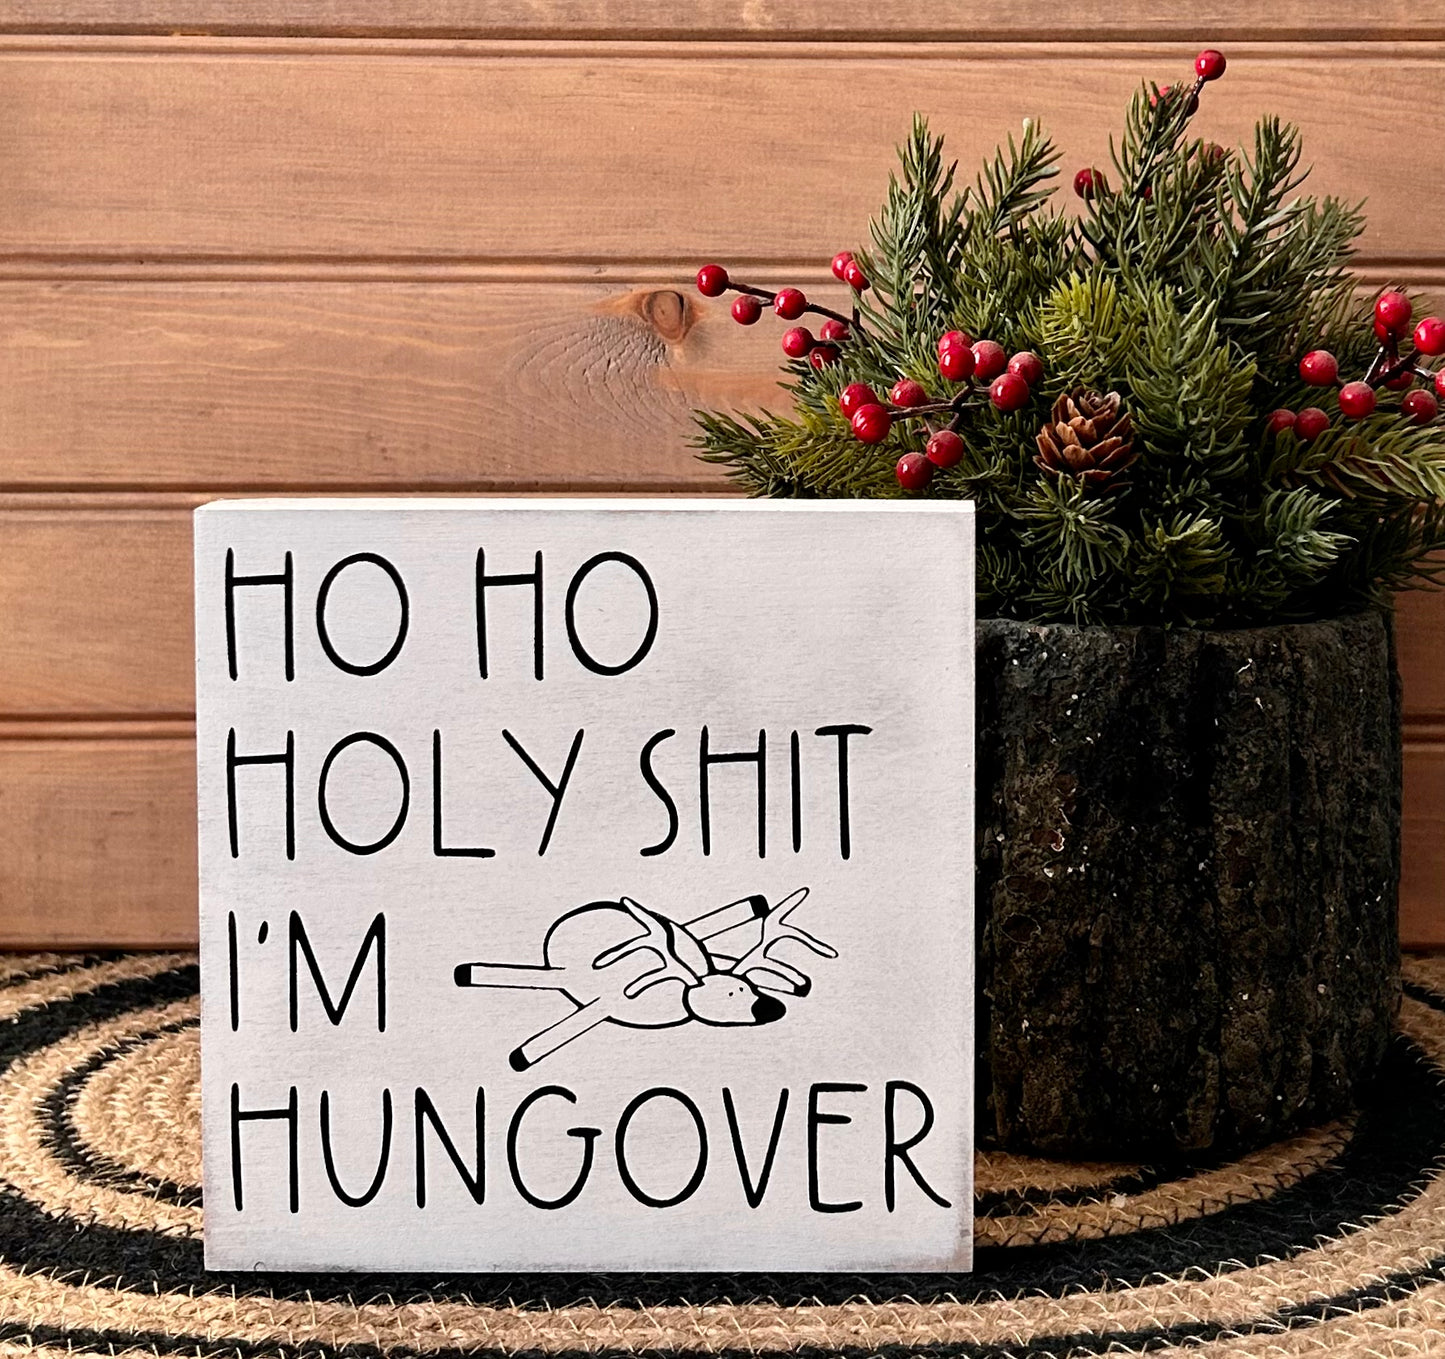 "Hungover" funny wood sign